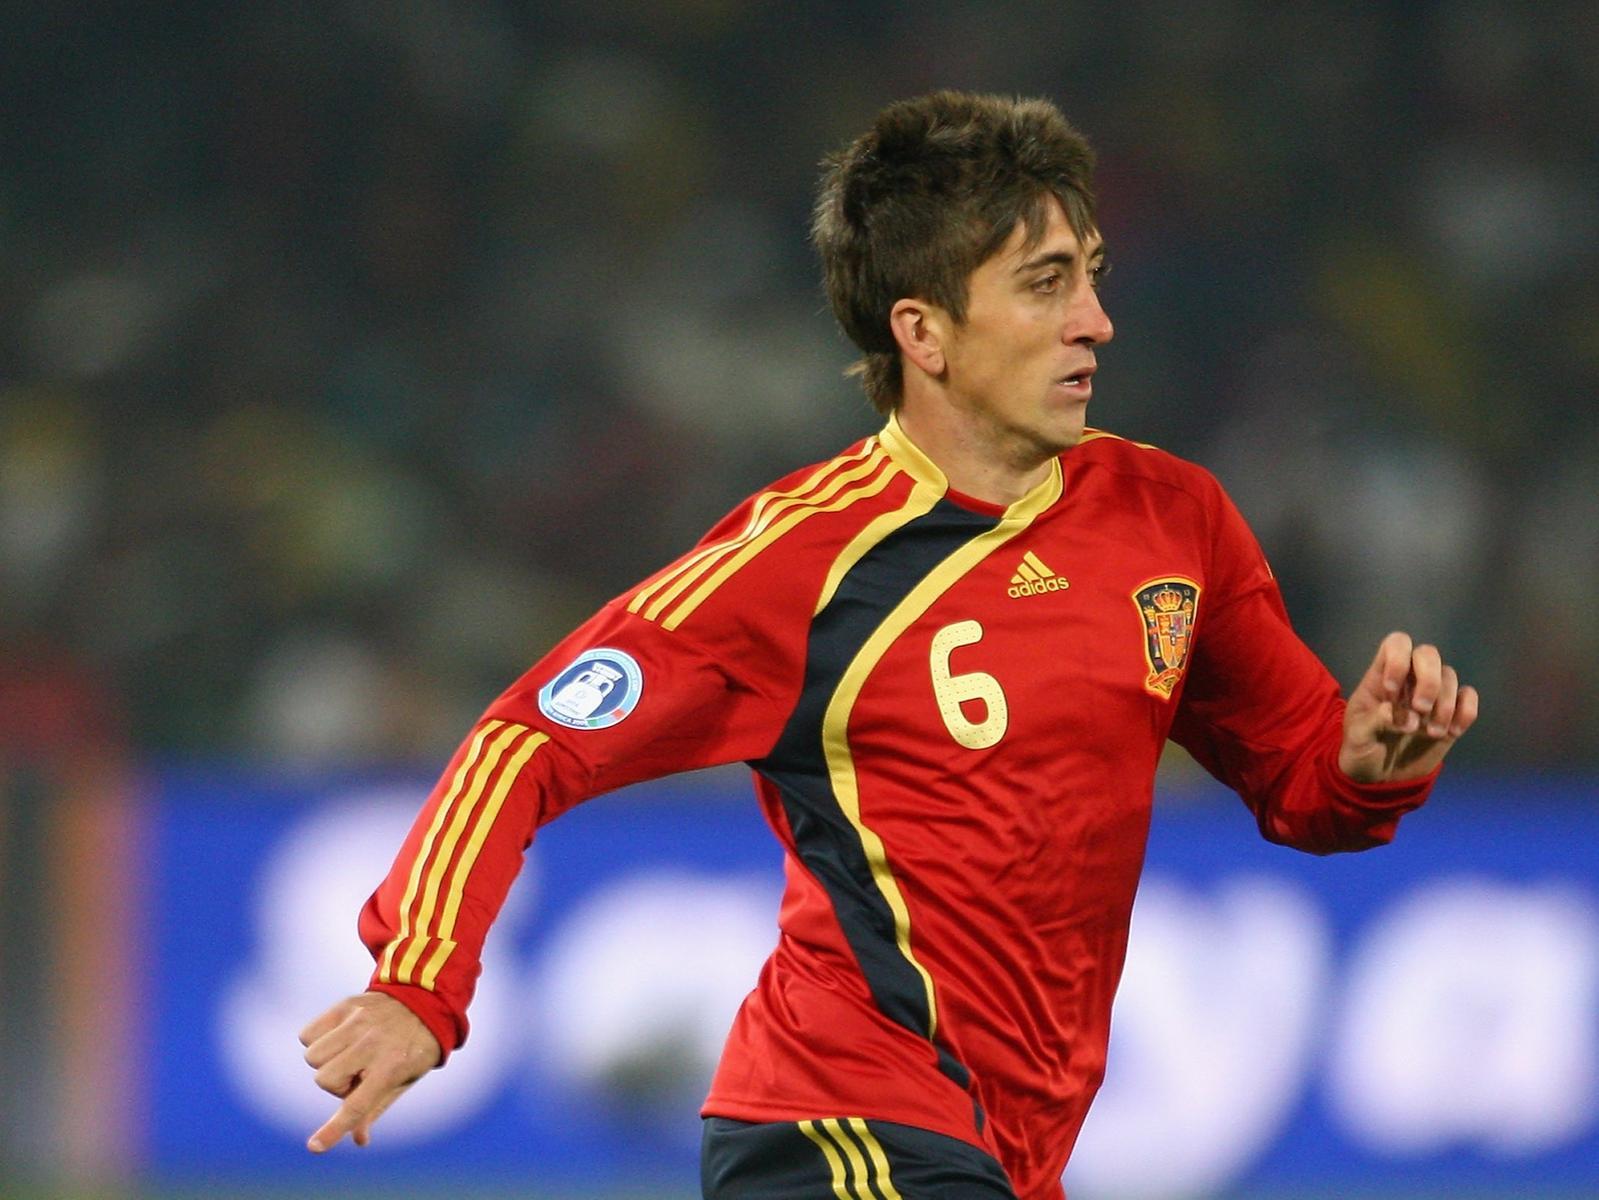 That Hernandez made four appearances for Spain after their Euro 2008 win shows how highly he was rated. When he was drafted into Spain's squad for the Confederations Cup, it was as a replacement for Andres Iniesta for goodness sake. He even scored once too, in a 5-1 win against Austria.